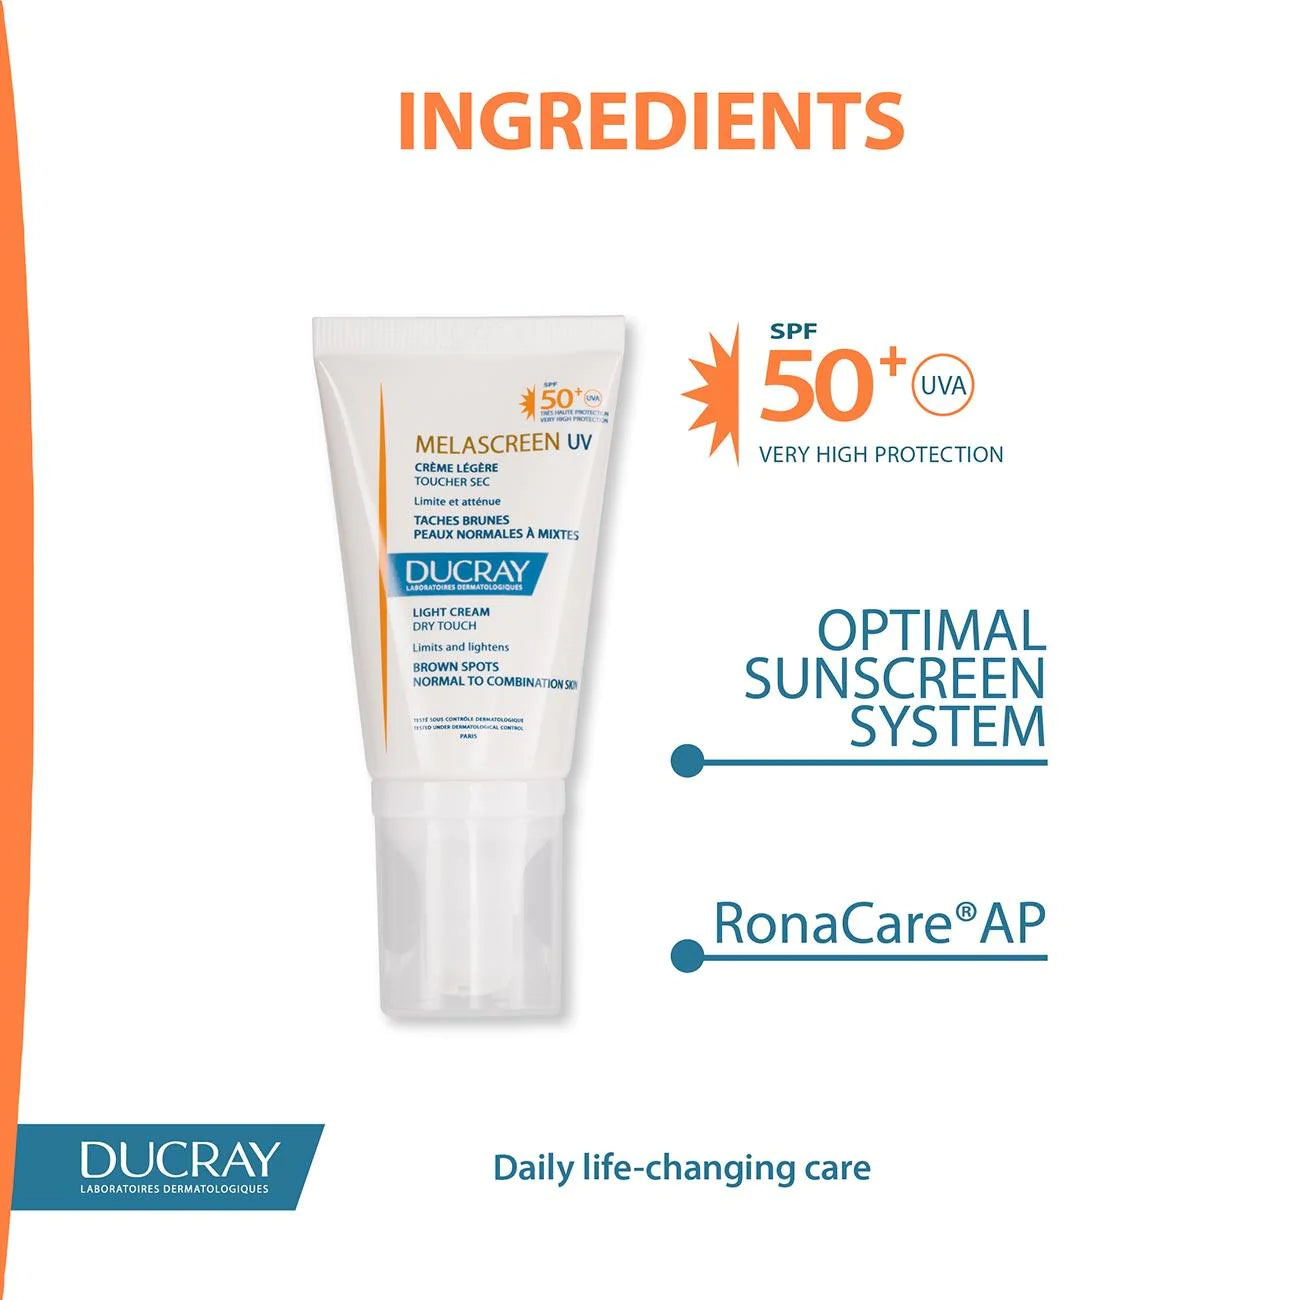 DUCRAY Melascreen UV Light Cream Dry Touch SPF50+ - Brown Spots, Normal to Combination Skin